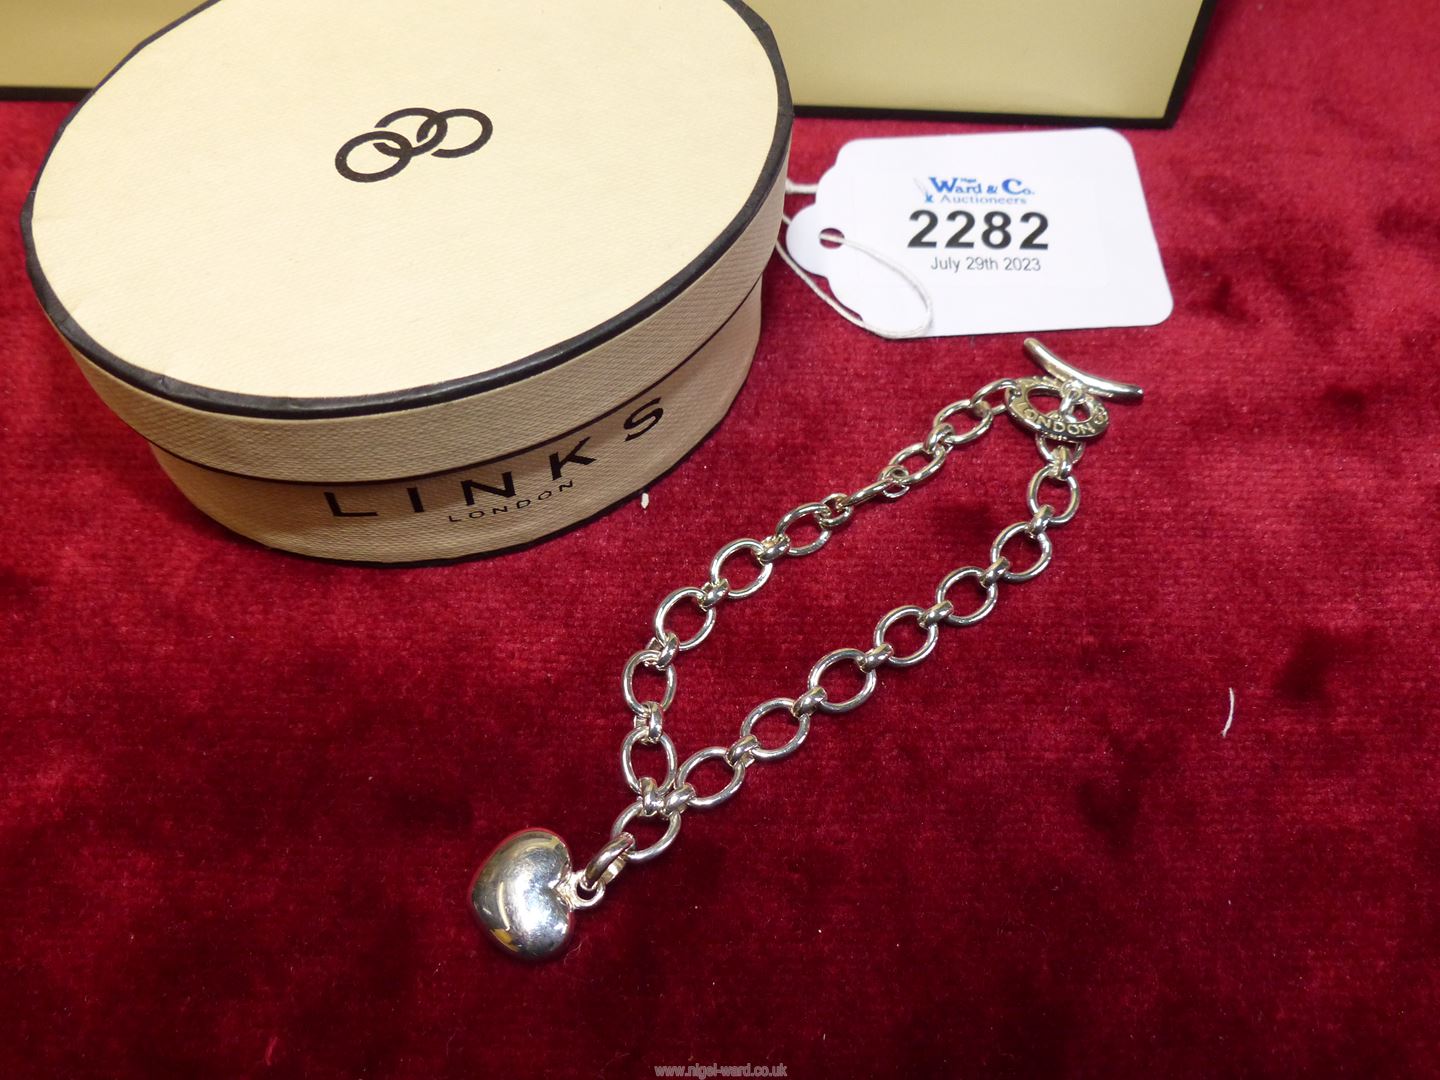 A Links of London 925 'T' bar bracelet with heart charm, cloth pouch, box and gift bag. - Image 2 of 3